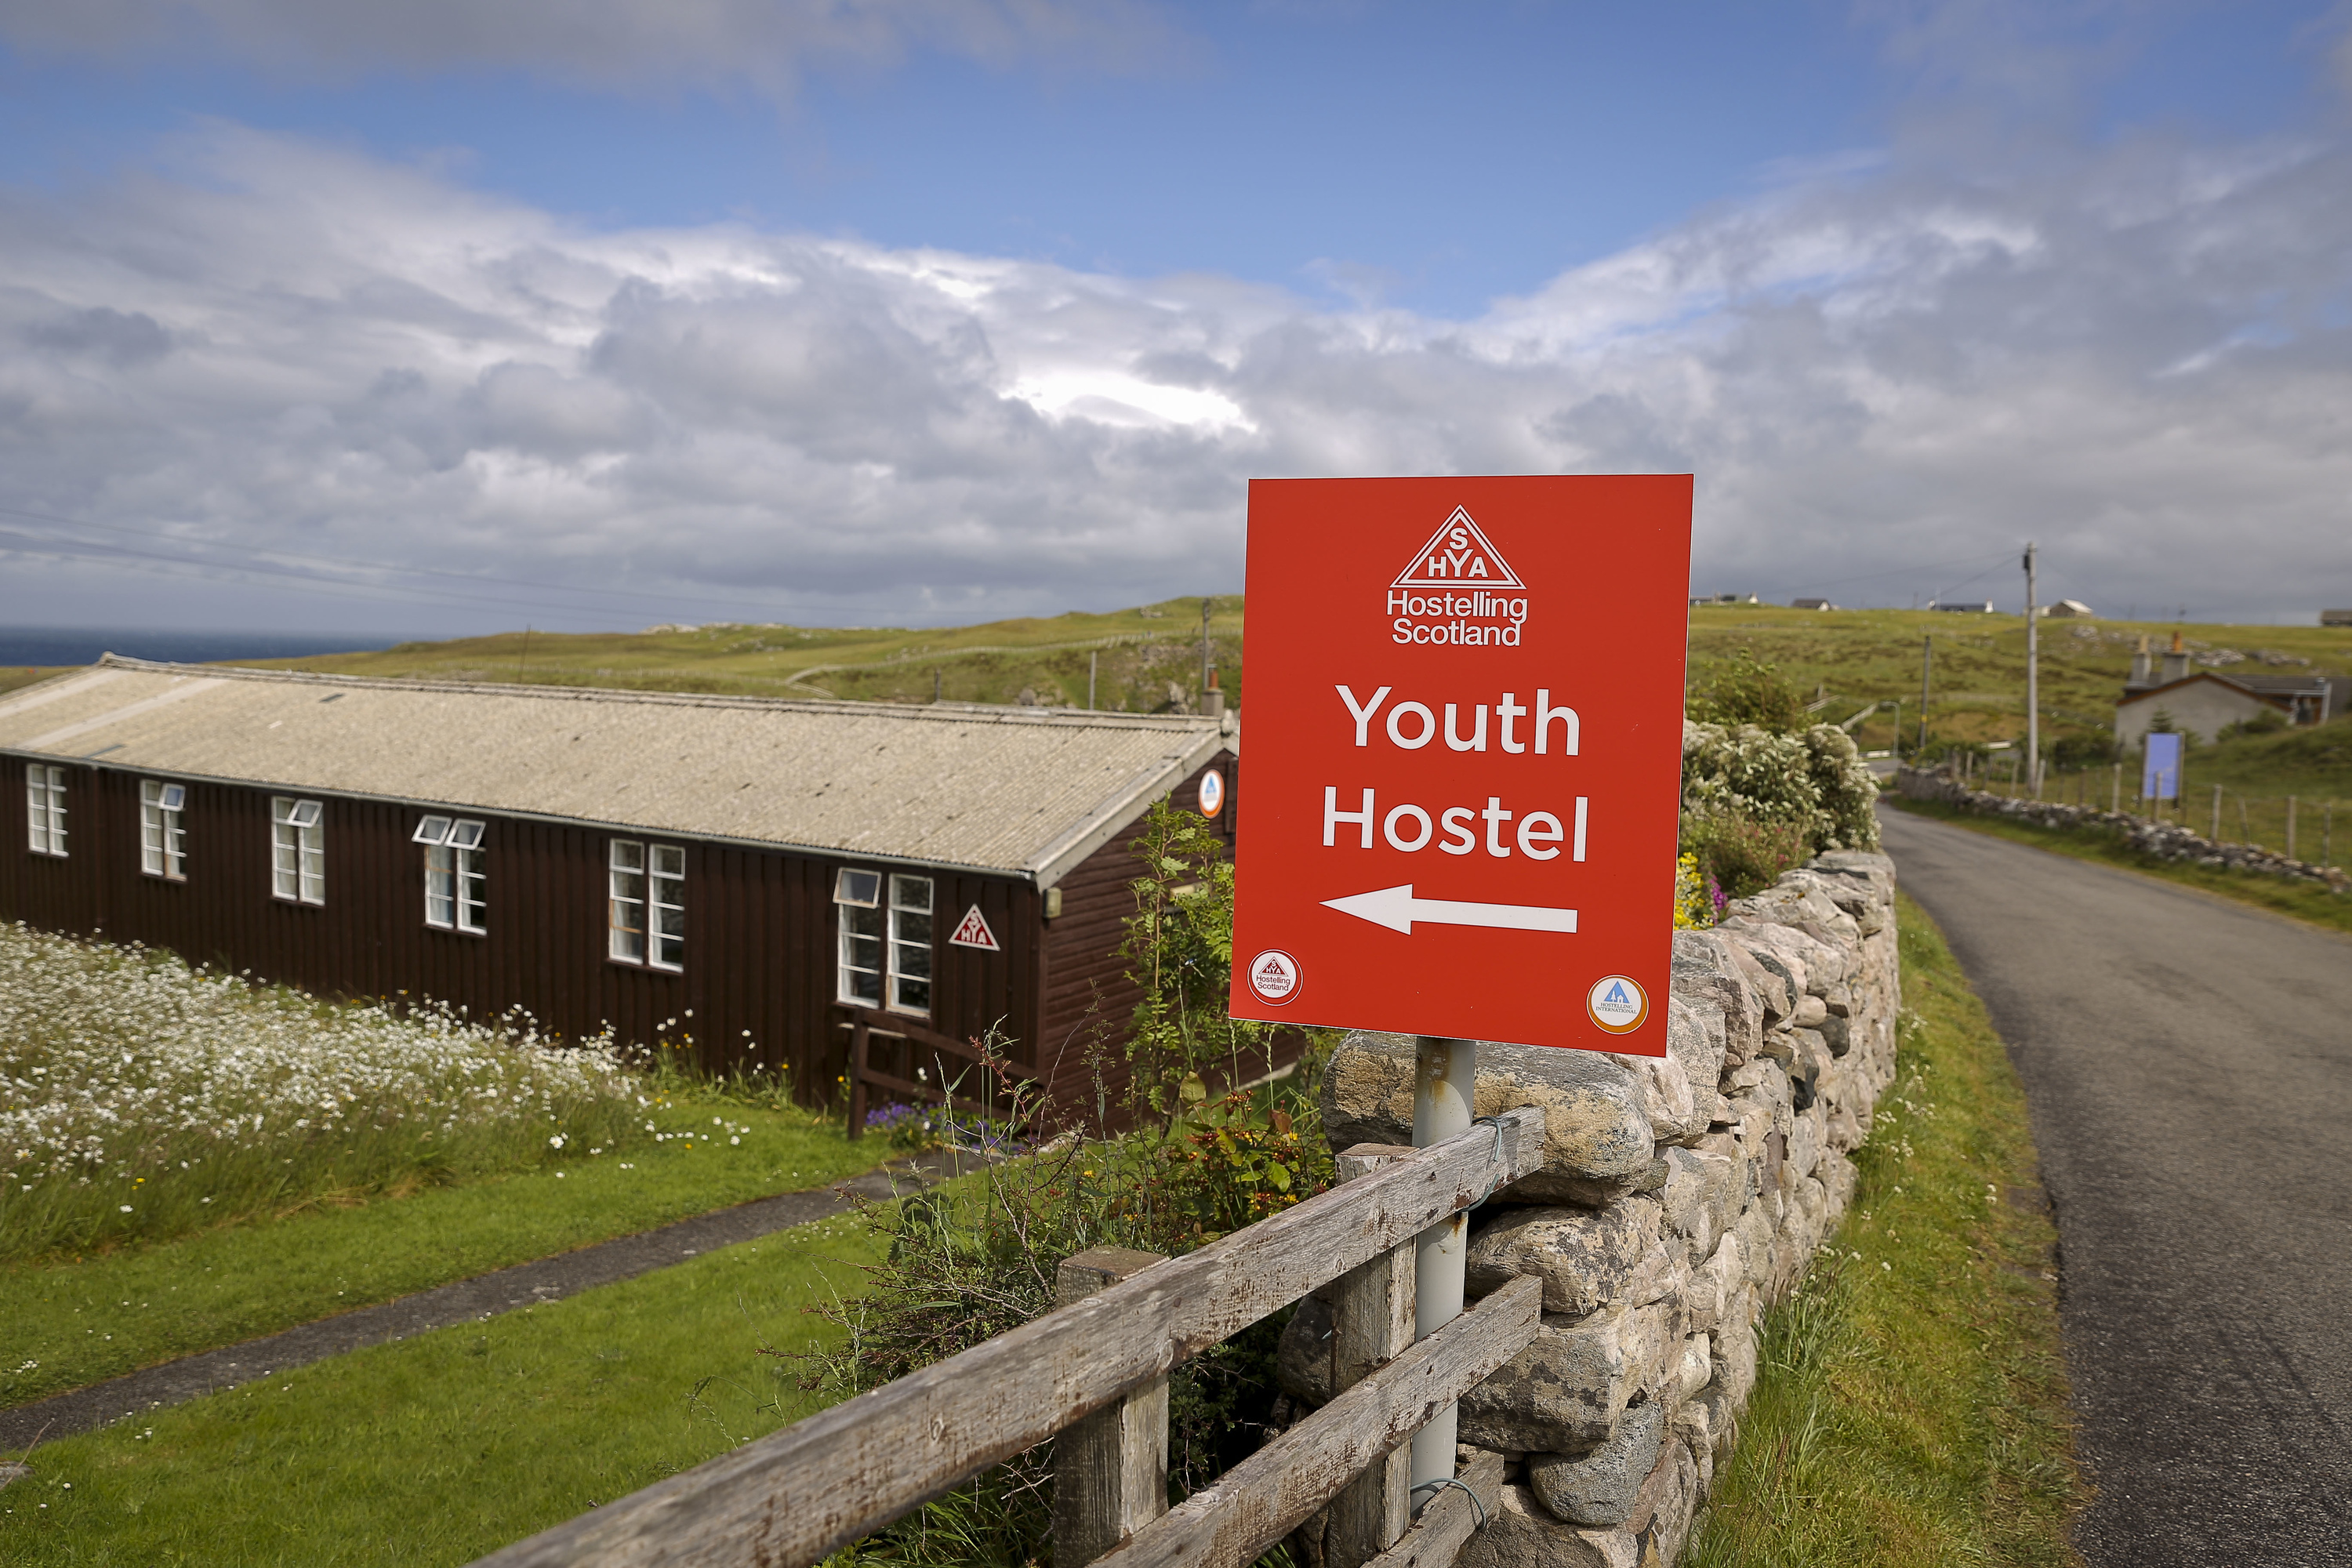 Durness-Smoo Youth Hostel. The entire network has been closed.